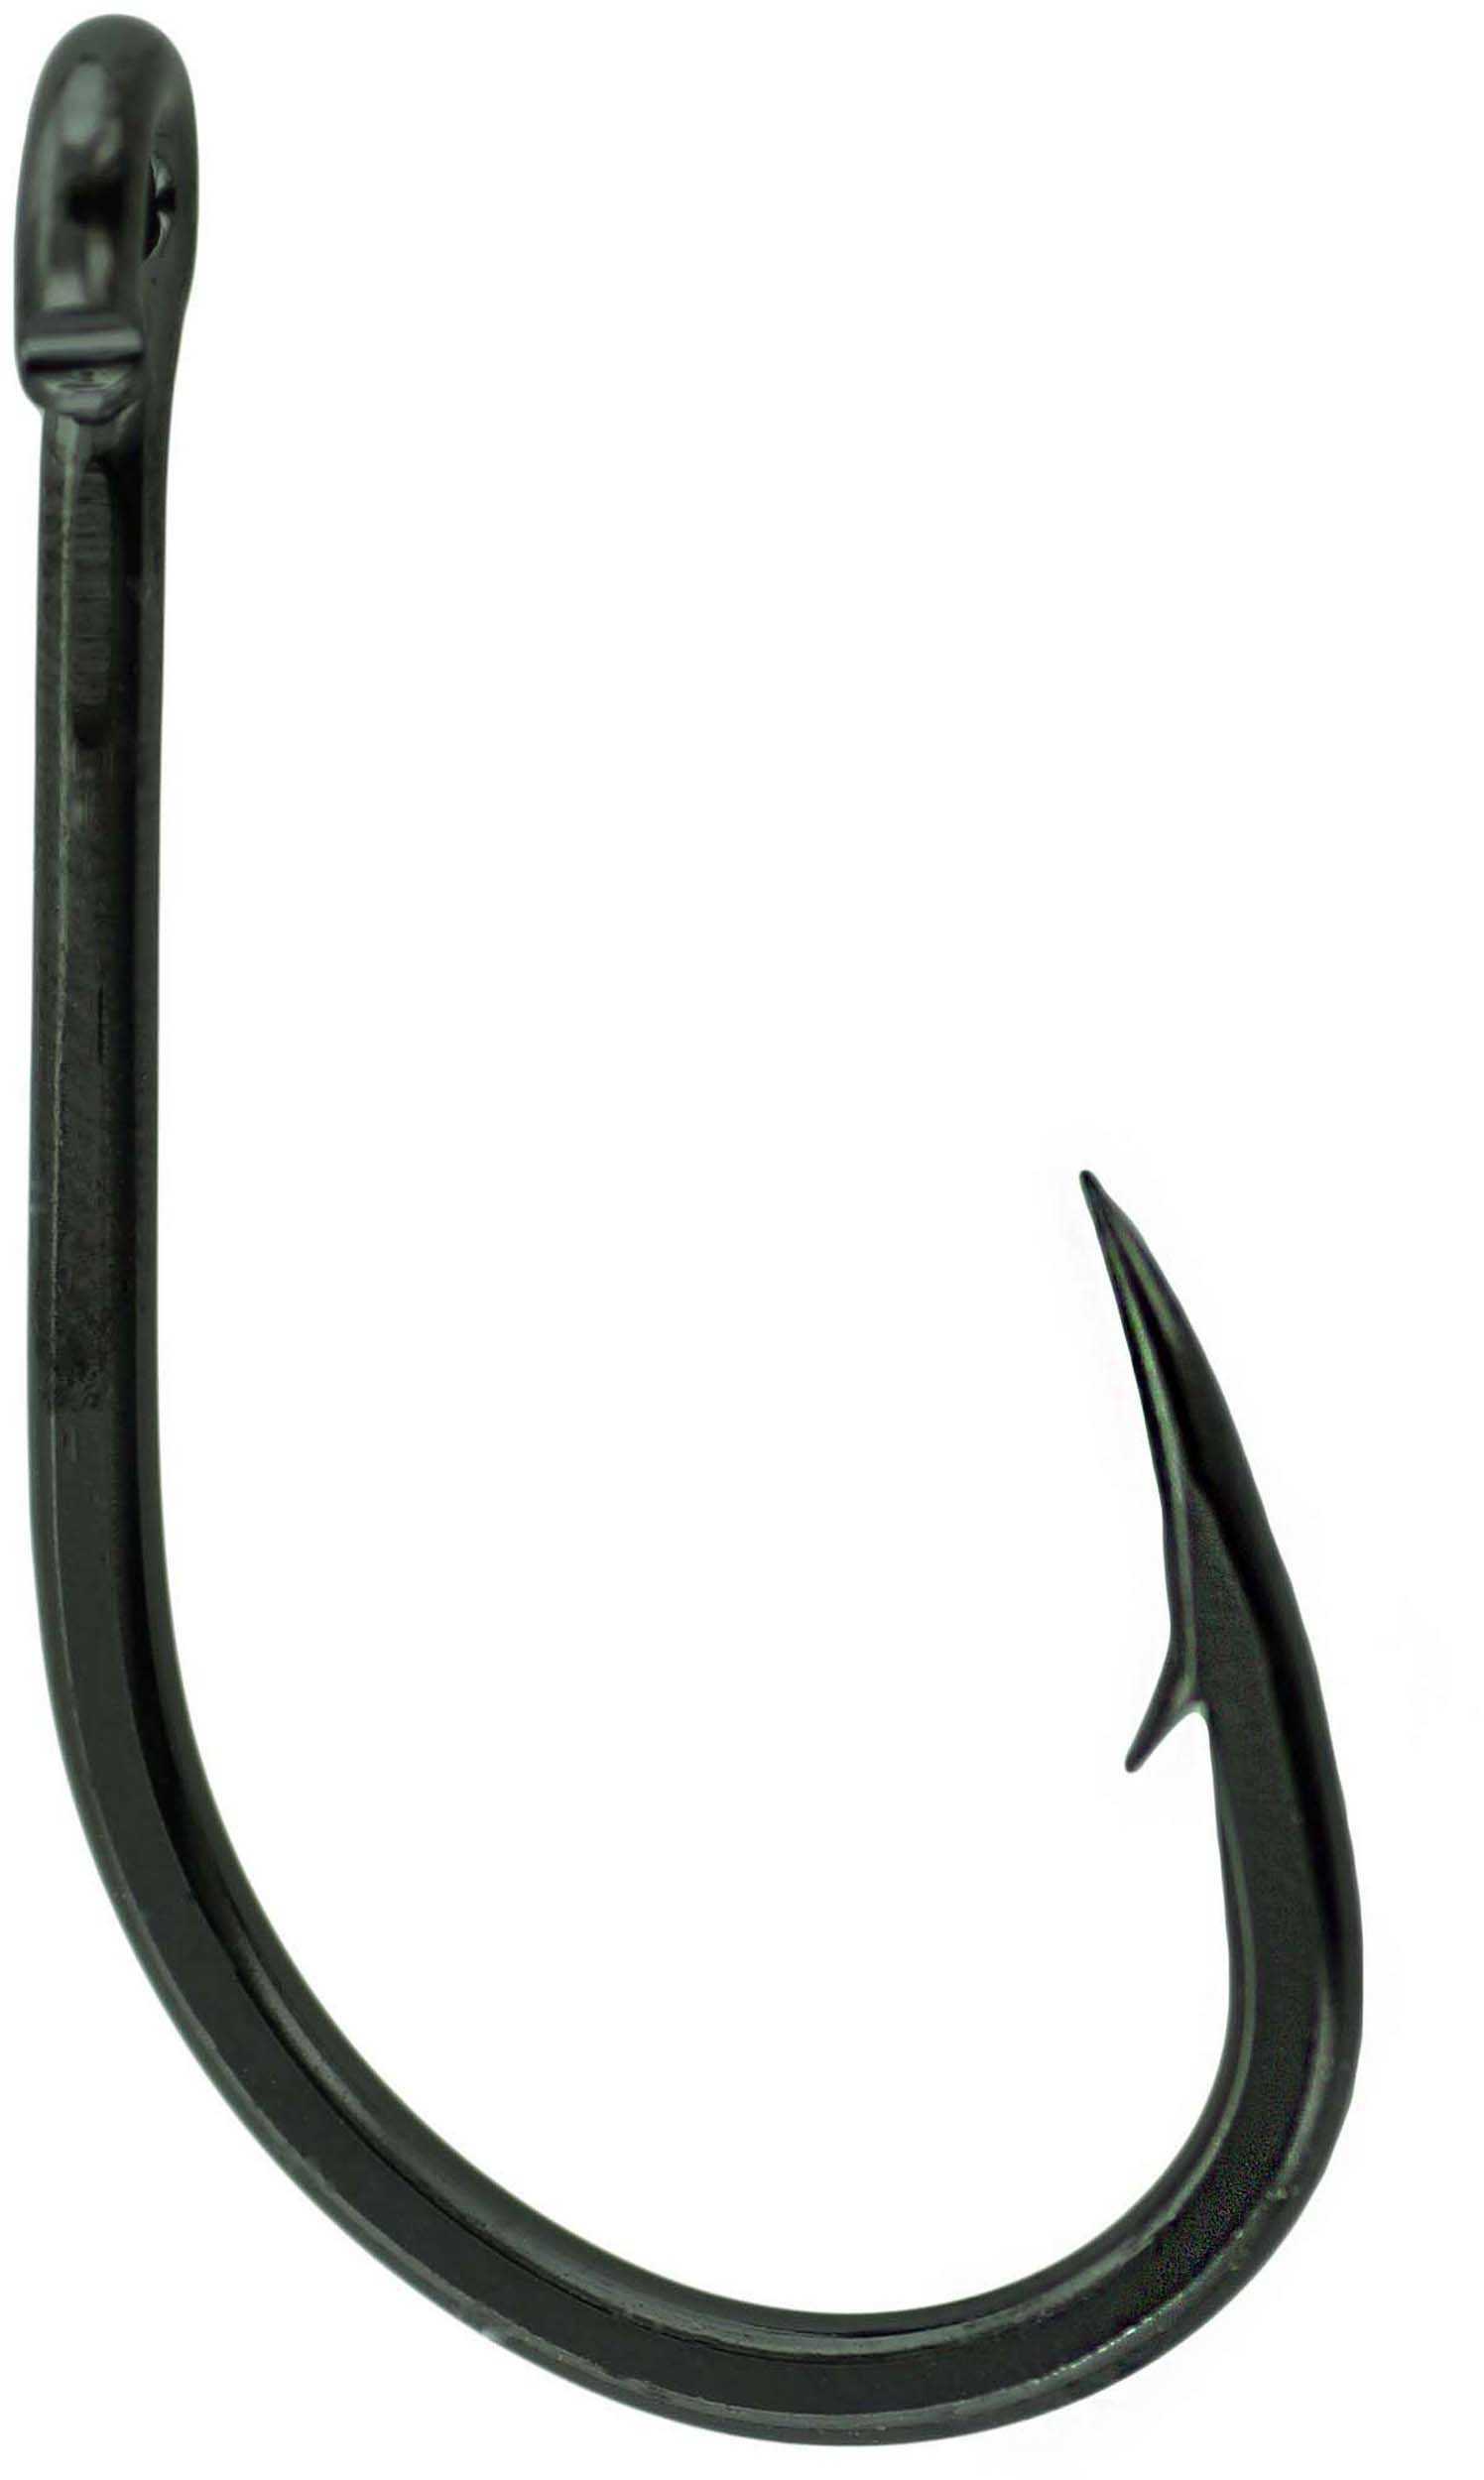 Gamakatsu Octopus Straight Eye 4X Strong Inline Point Hook, NS Black Size 9/0 Md: 263419